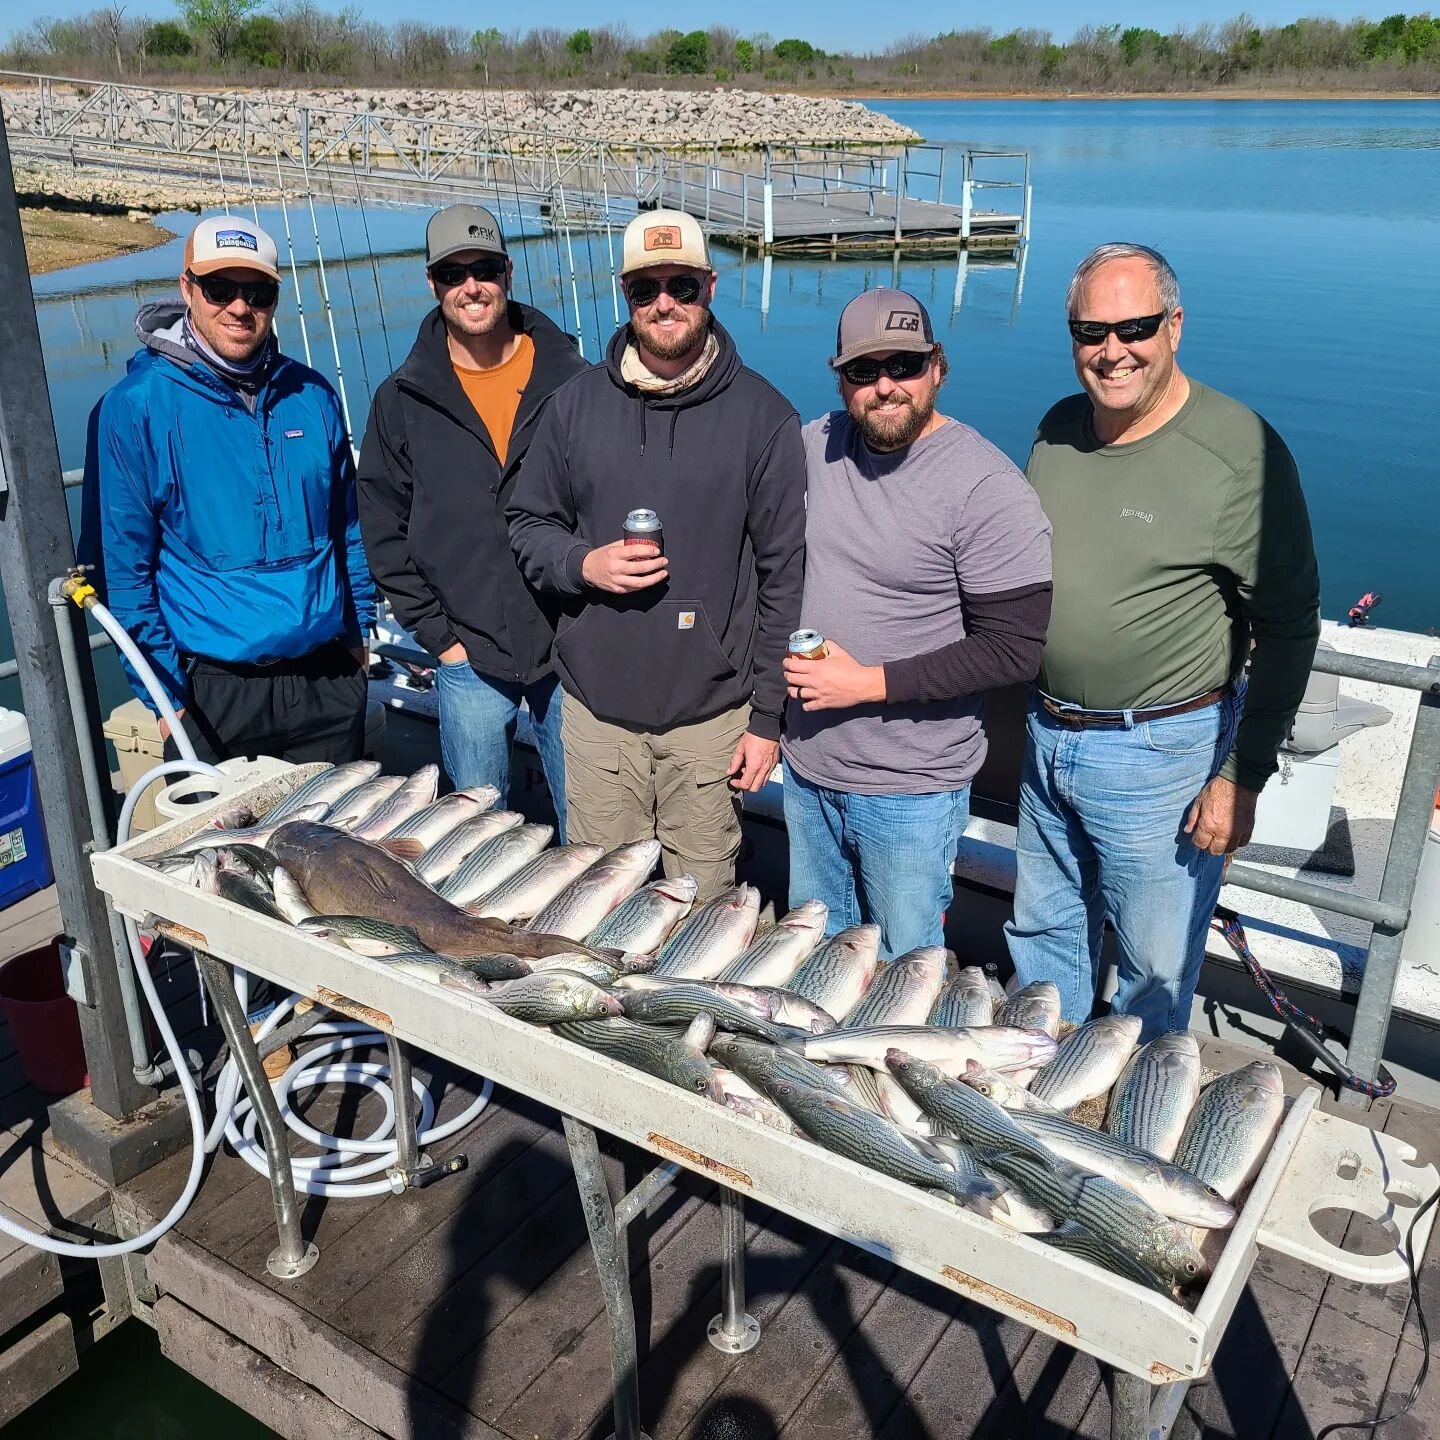 The bite is gettin' really good here on Lake Texoma! We had two great days of fishing and ended up with some good looking fish piles. Thank you to Jason and the guys for coming out! 

#GoodTimesFishingCo #LakeTexoma #OklahomaFishing #OklahomaFishingT